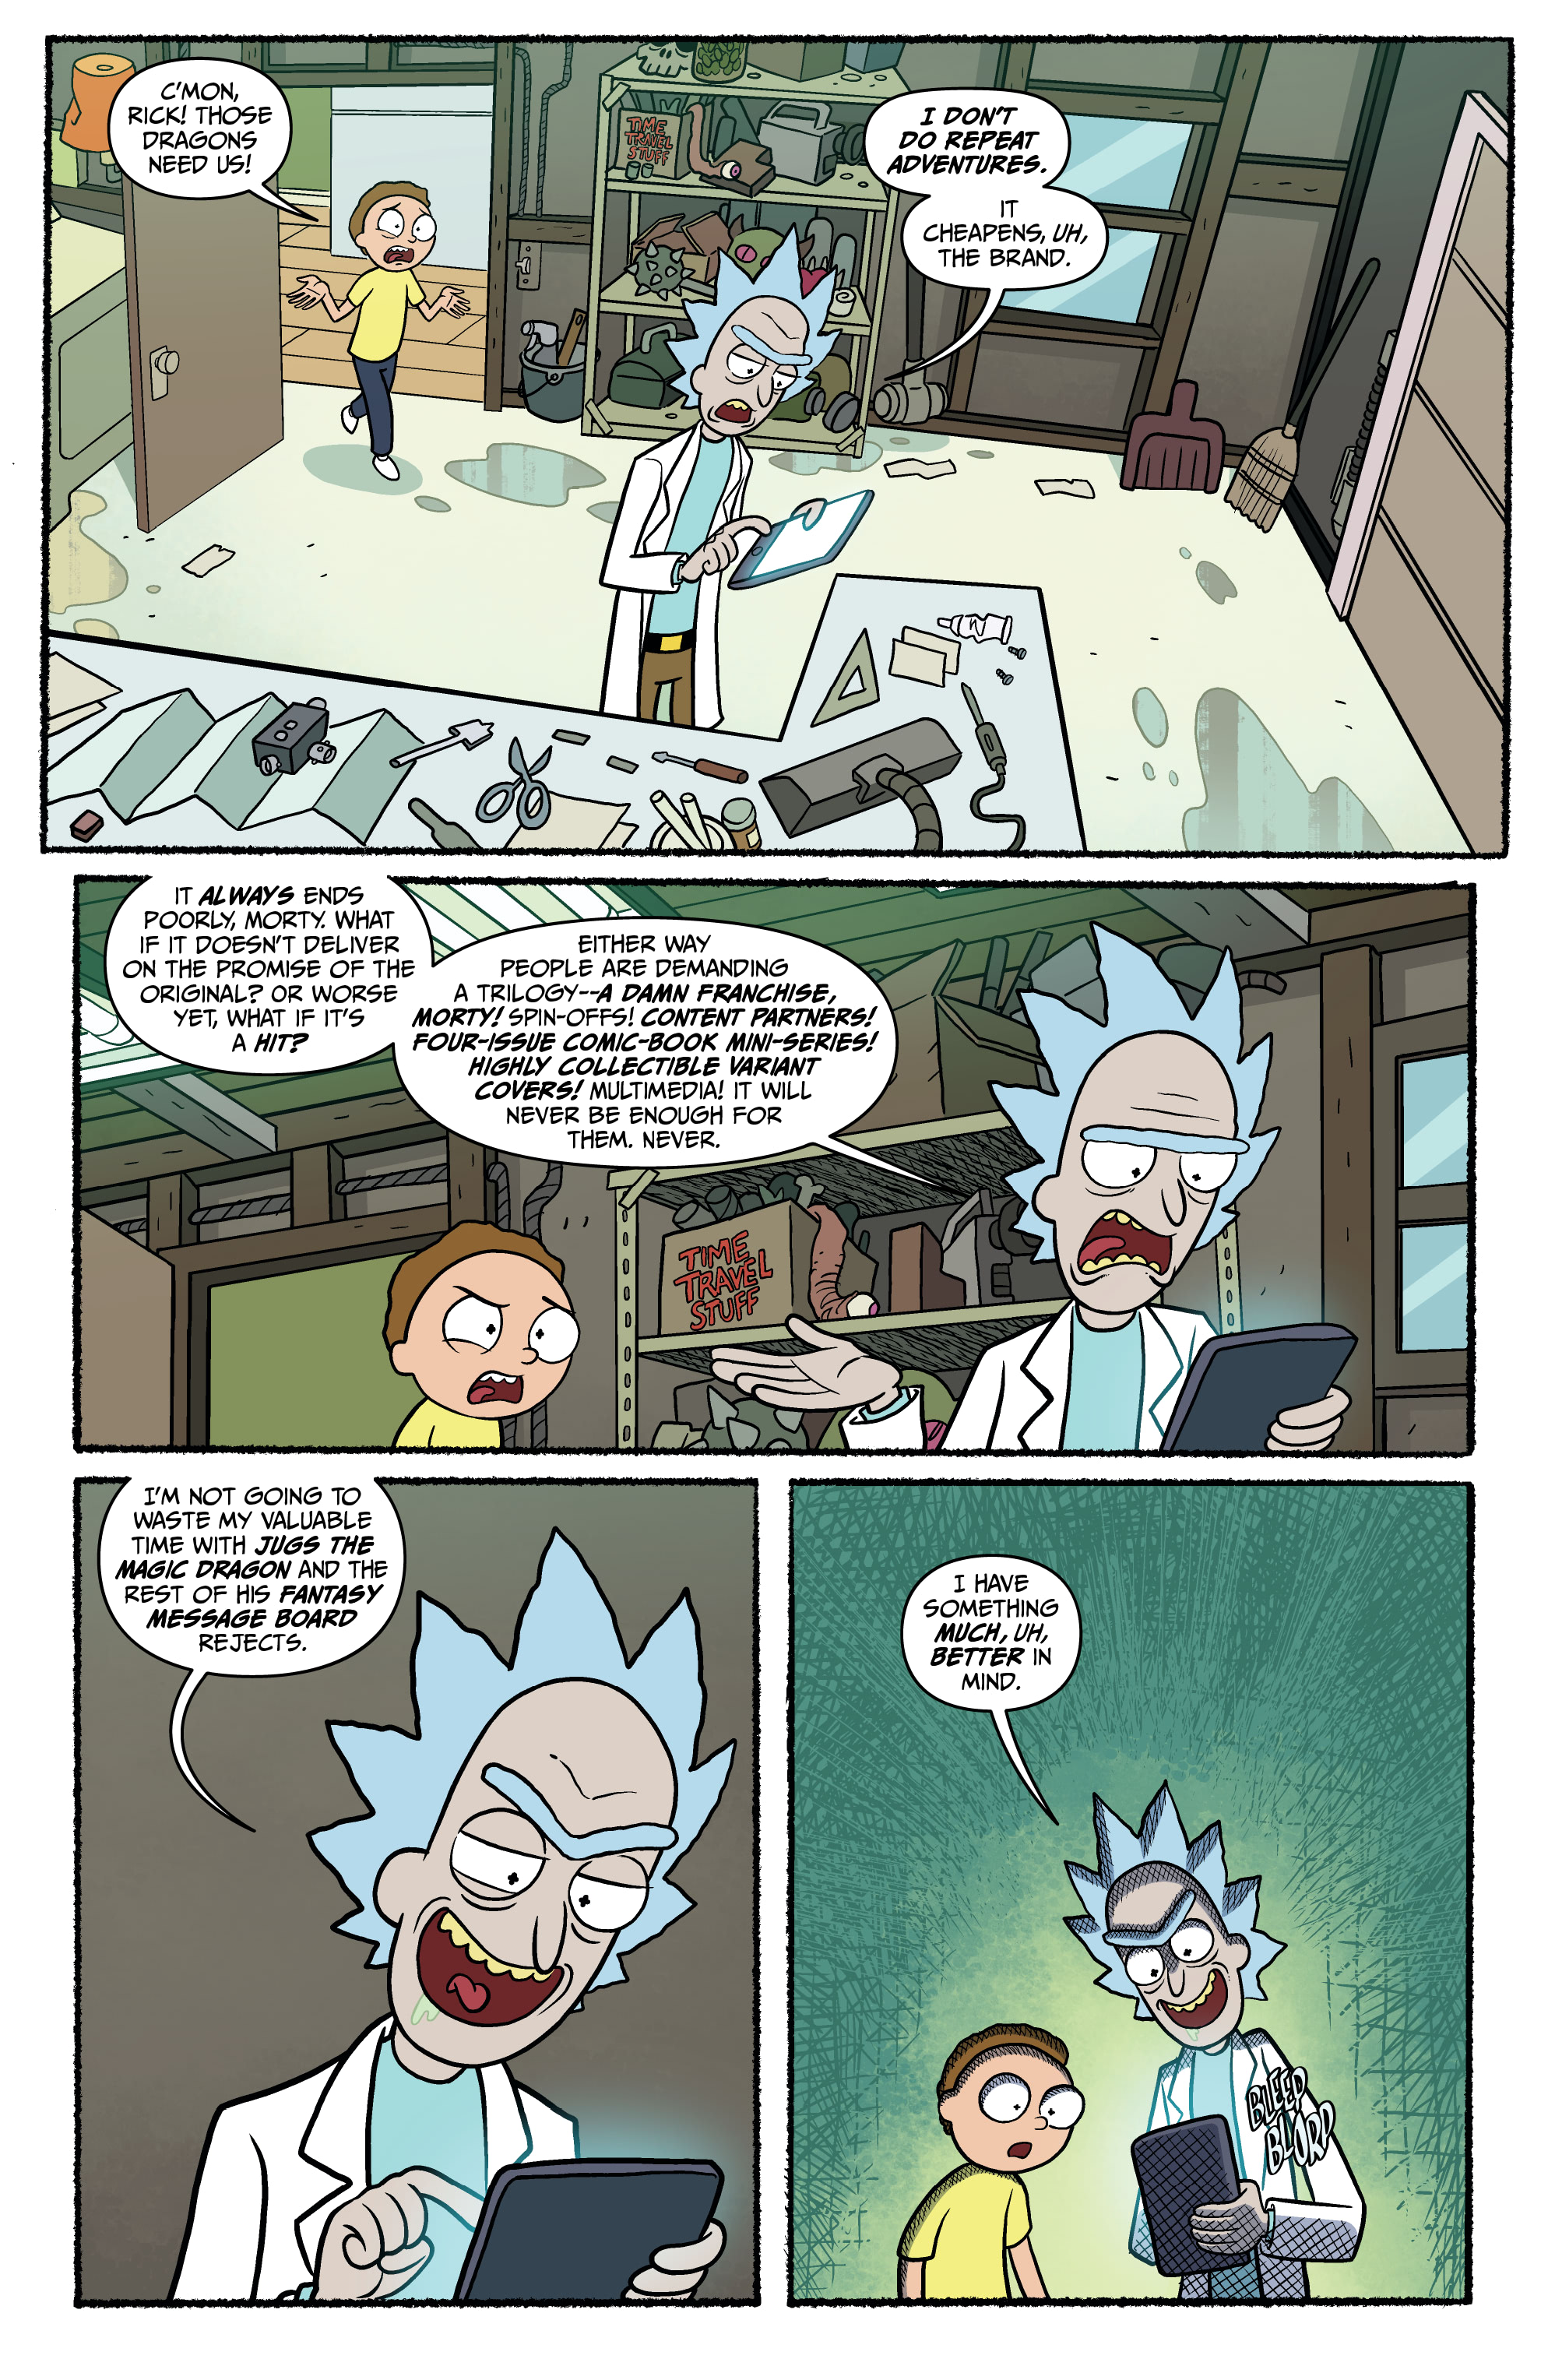 Rick and morty online comic